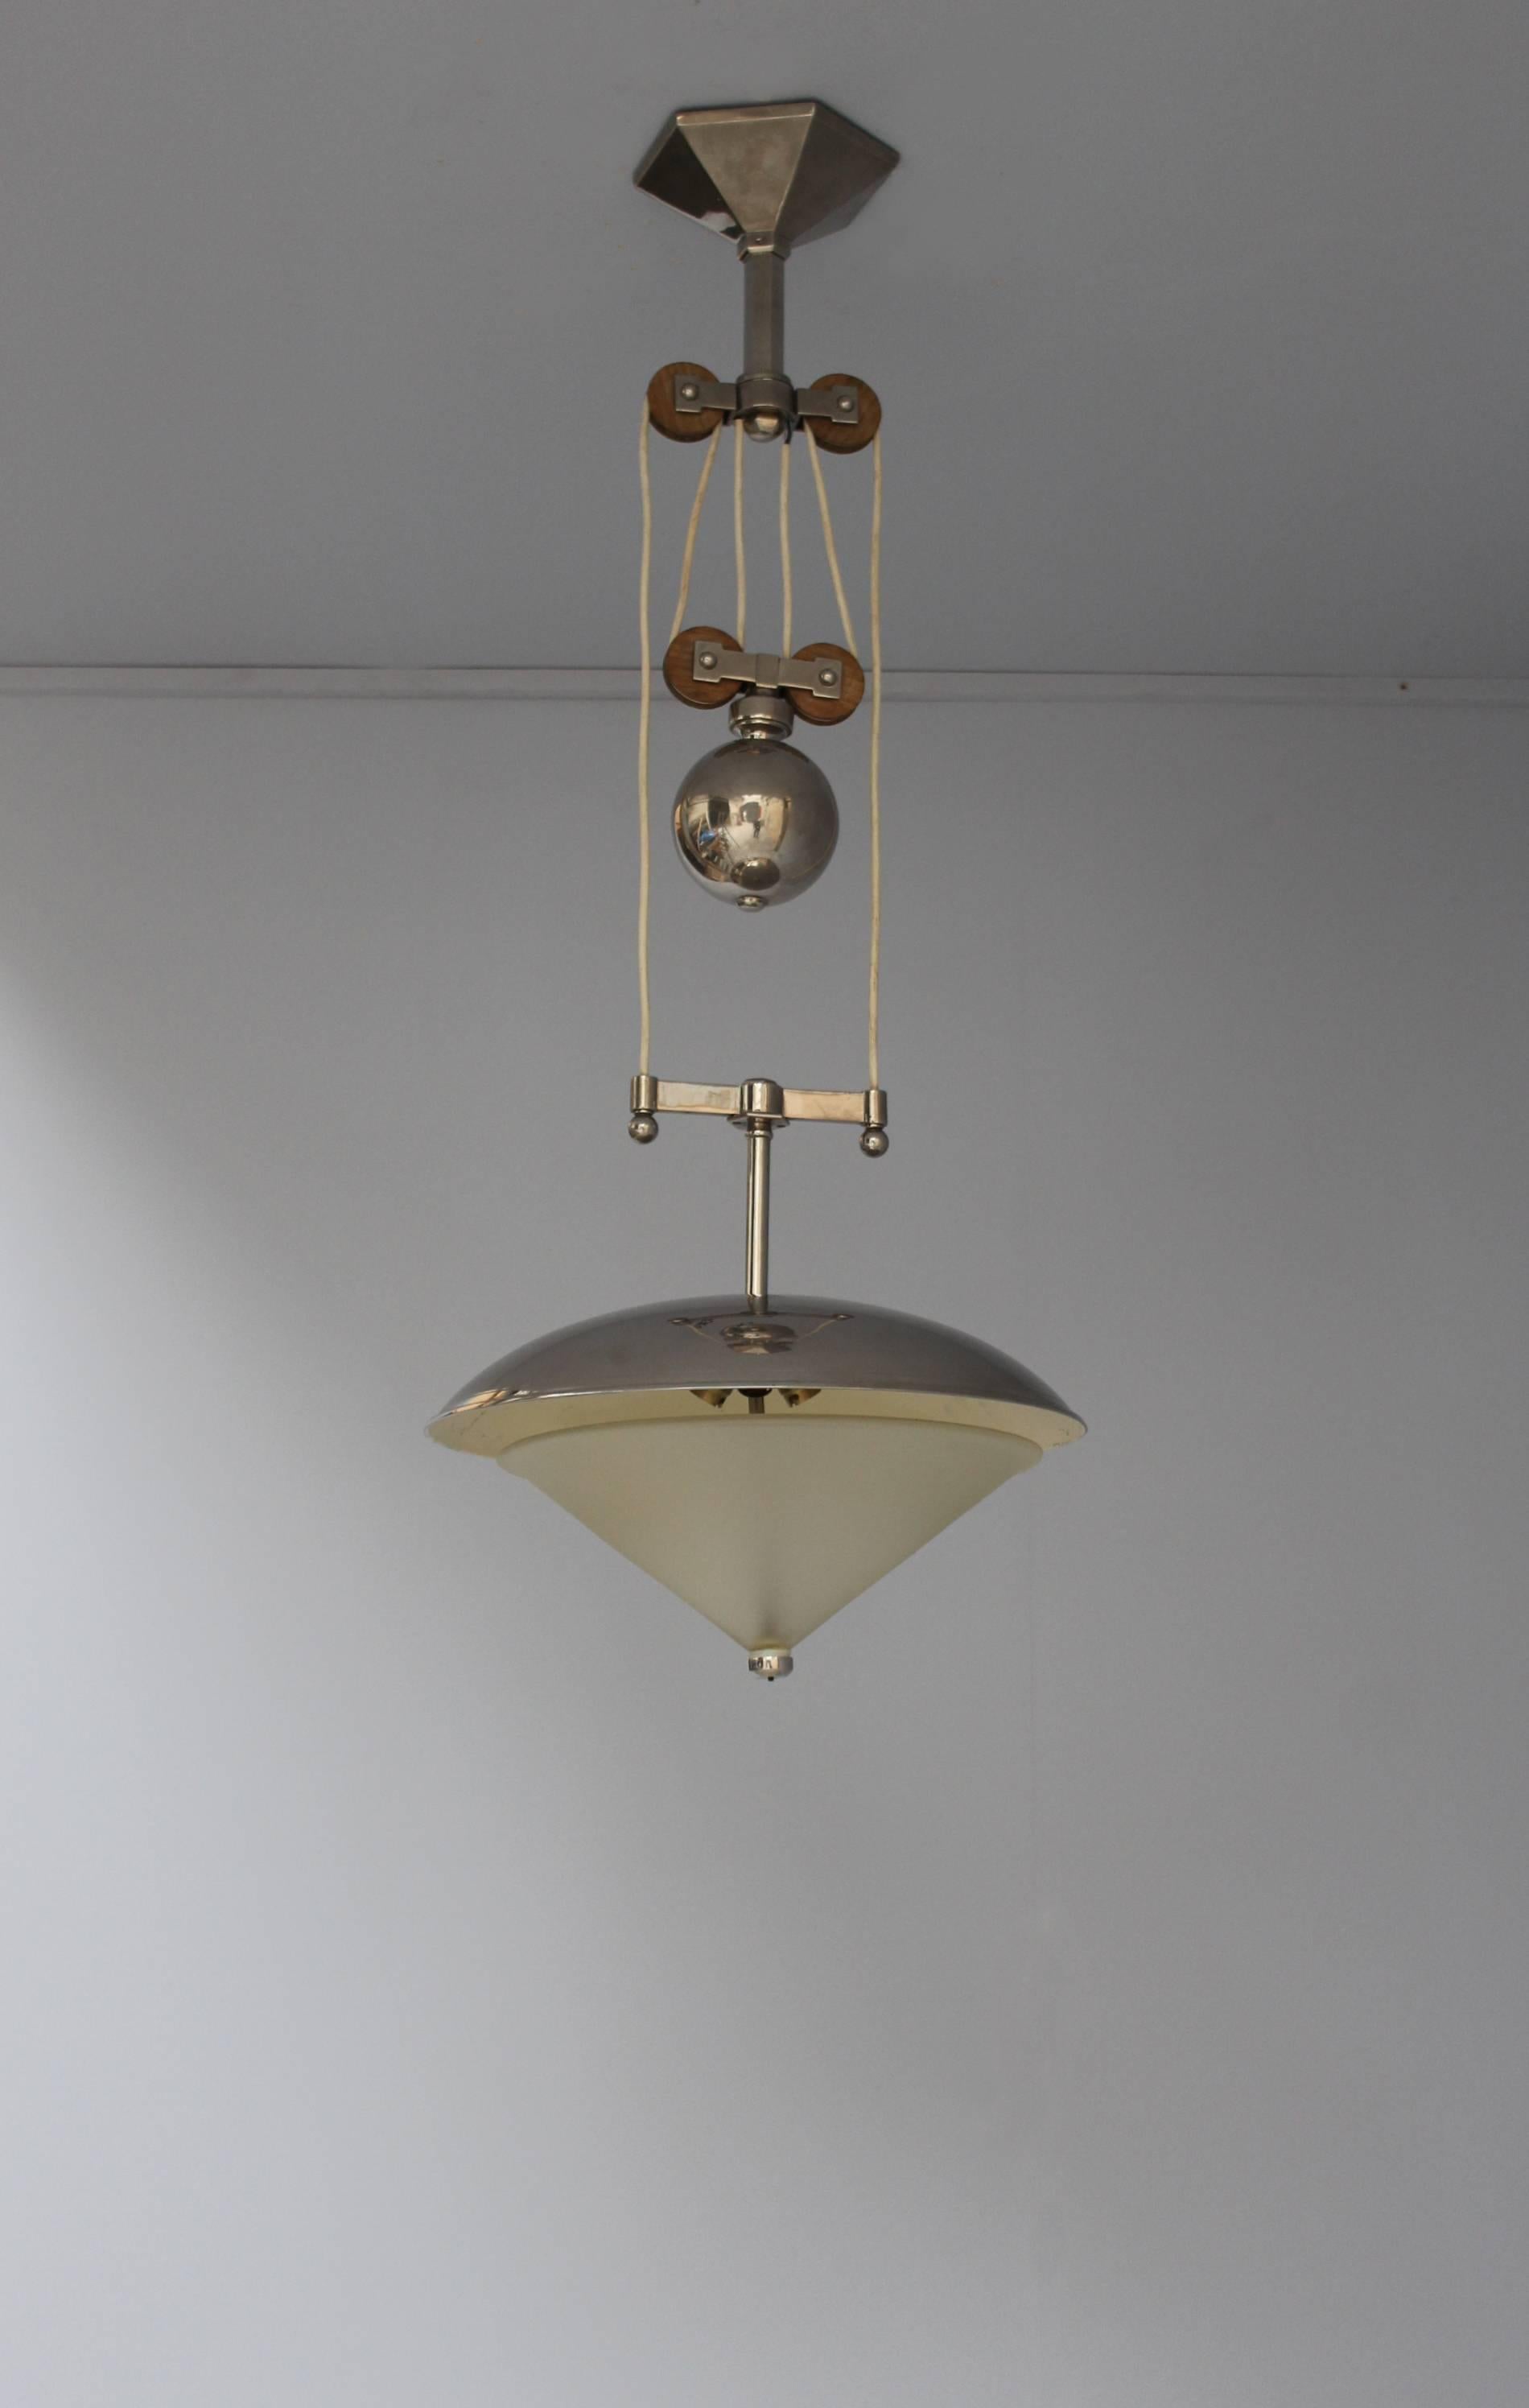 Unusual fine French Art Deco chrome and glass adjustable pendant/chandelier with wood details.